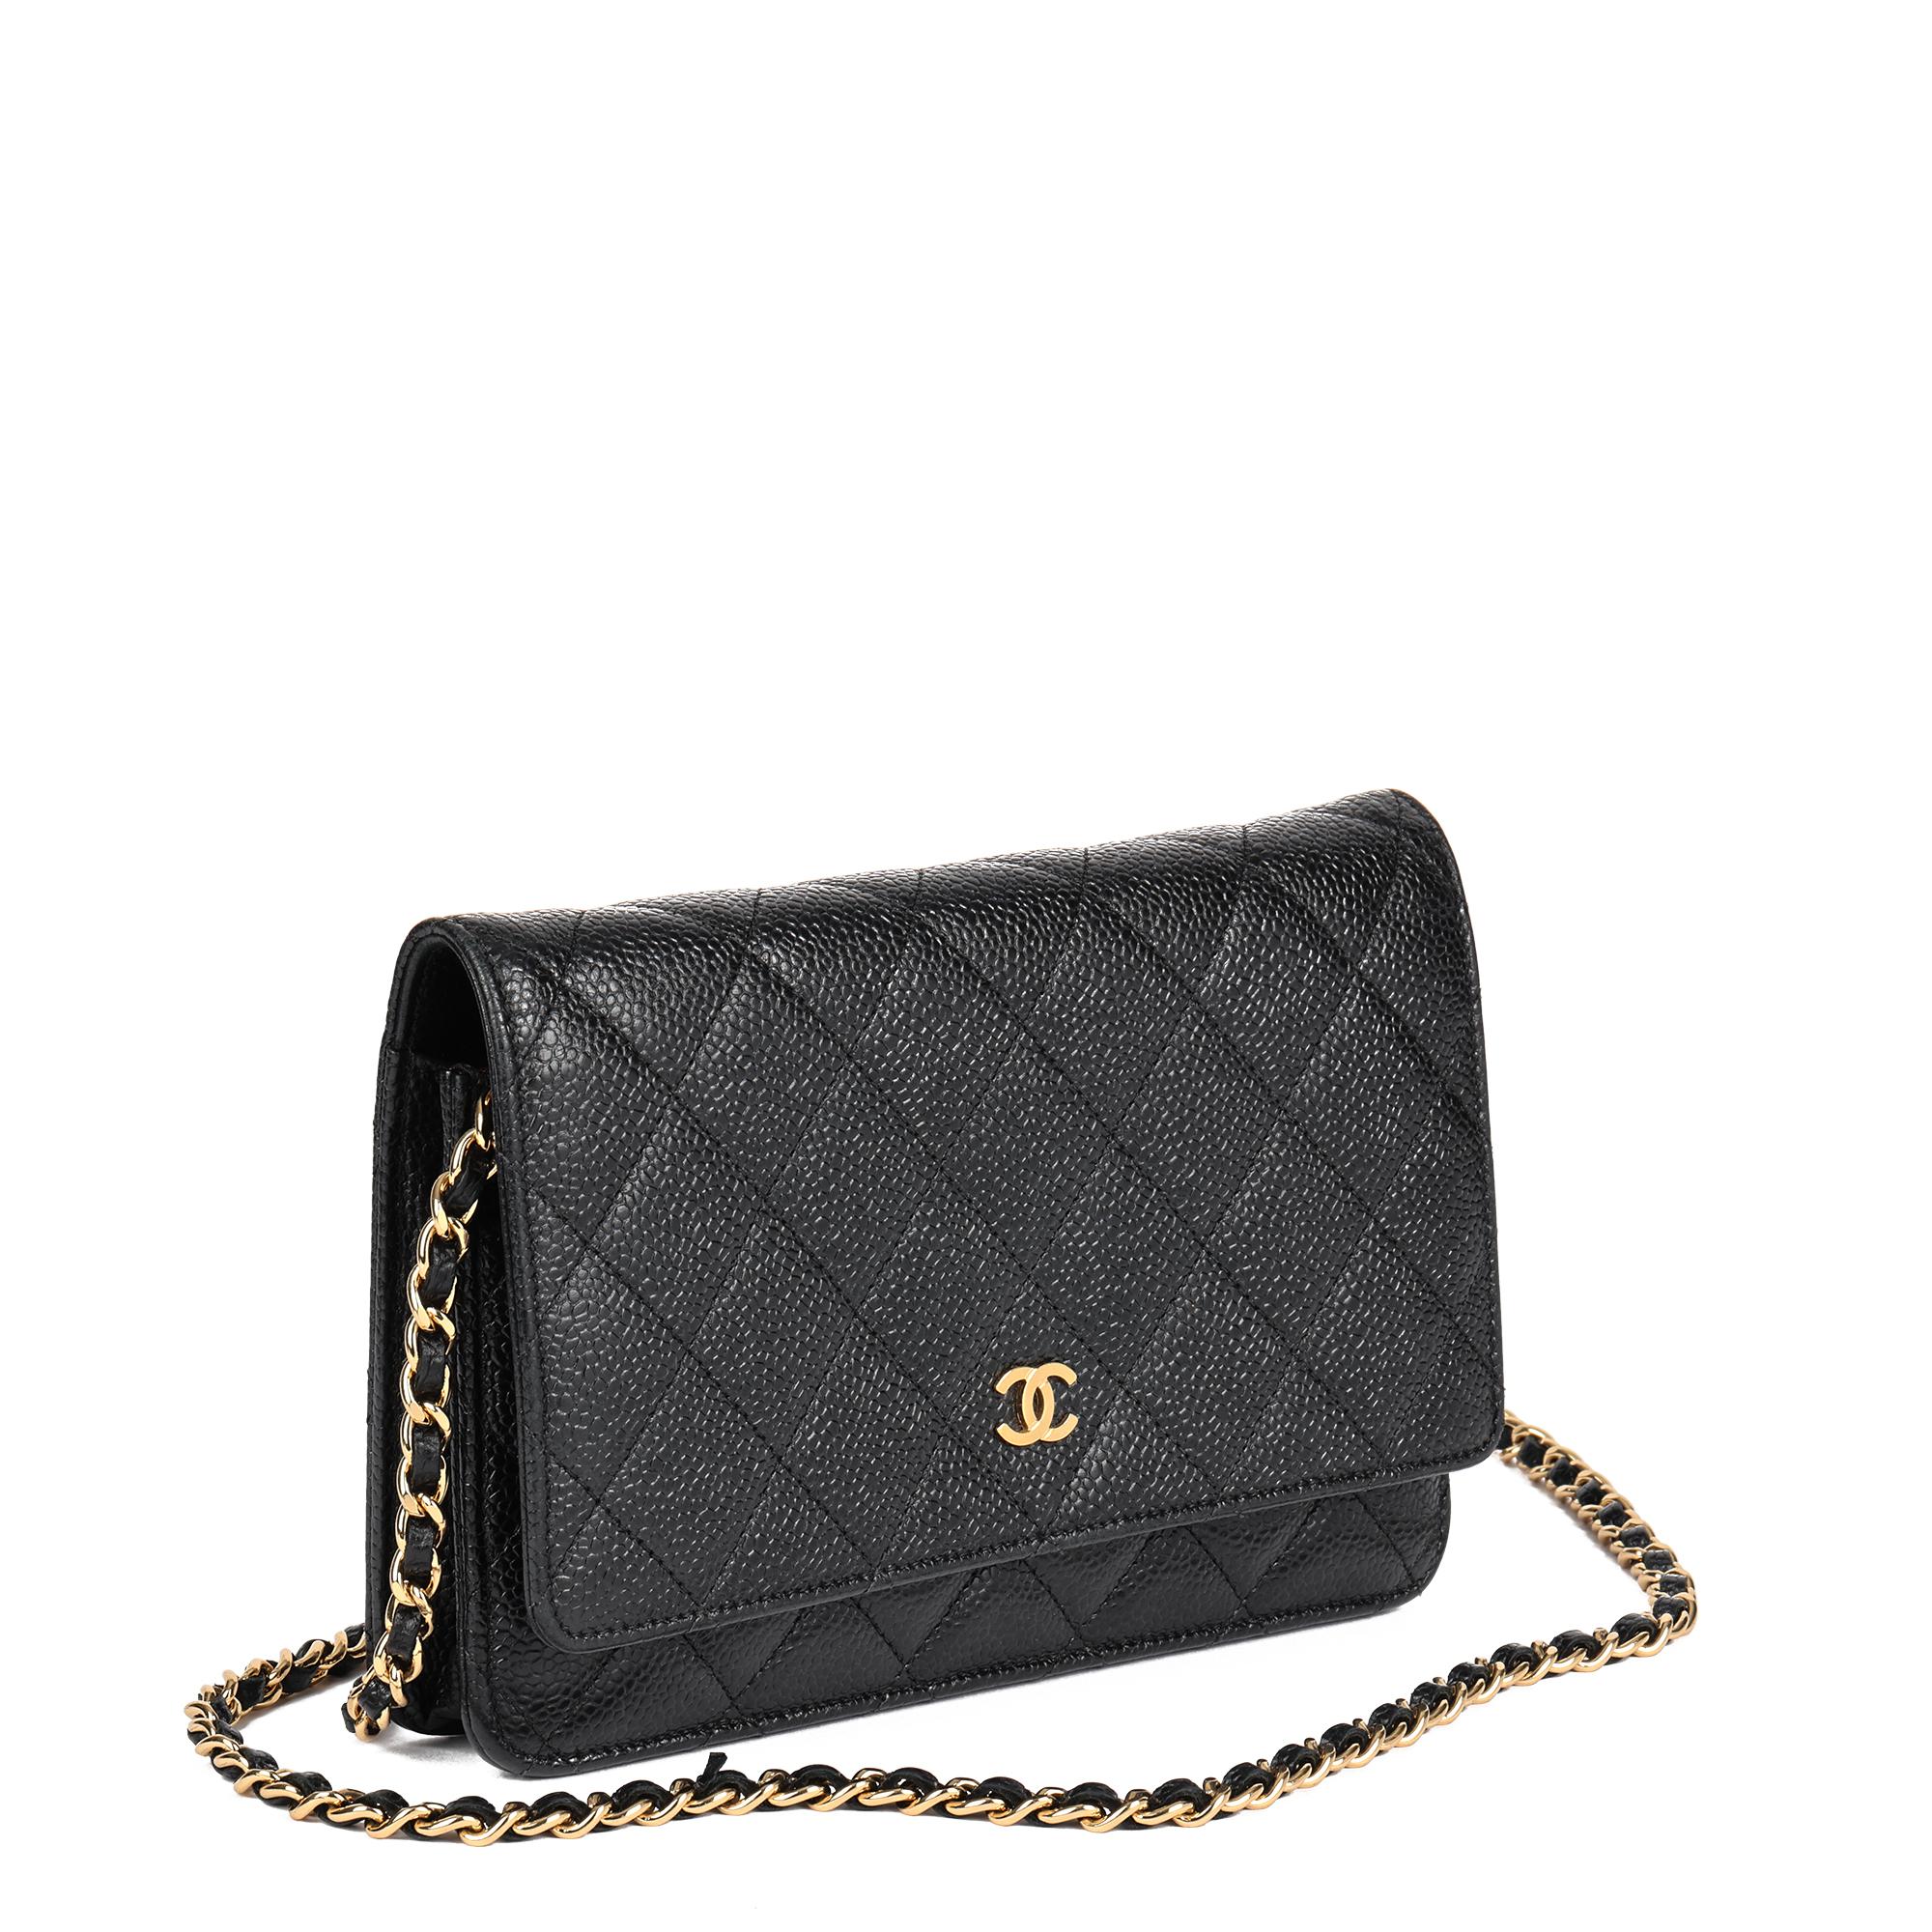 CHANEL
Black Quilted Caviar Leather Wallet-on-Chain WOC

Xupes Reference: CB734
Serial Number: 19051888
Age (Circa): 2014
Accompanied By: Chanel Dust Bag, Box, Protective Felt, Authenticity Card, Care Booklet
Authenticity Details: Authenticity Card,